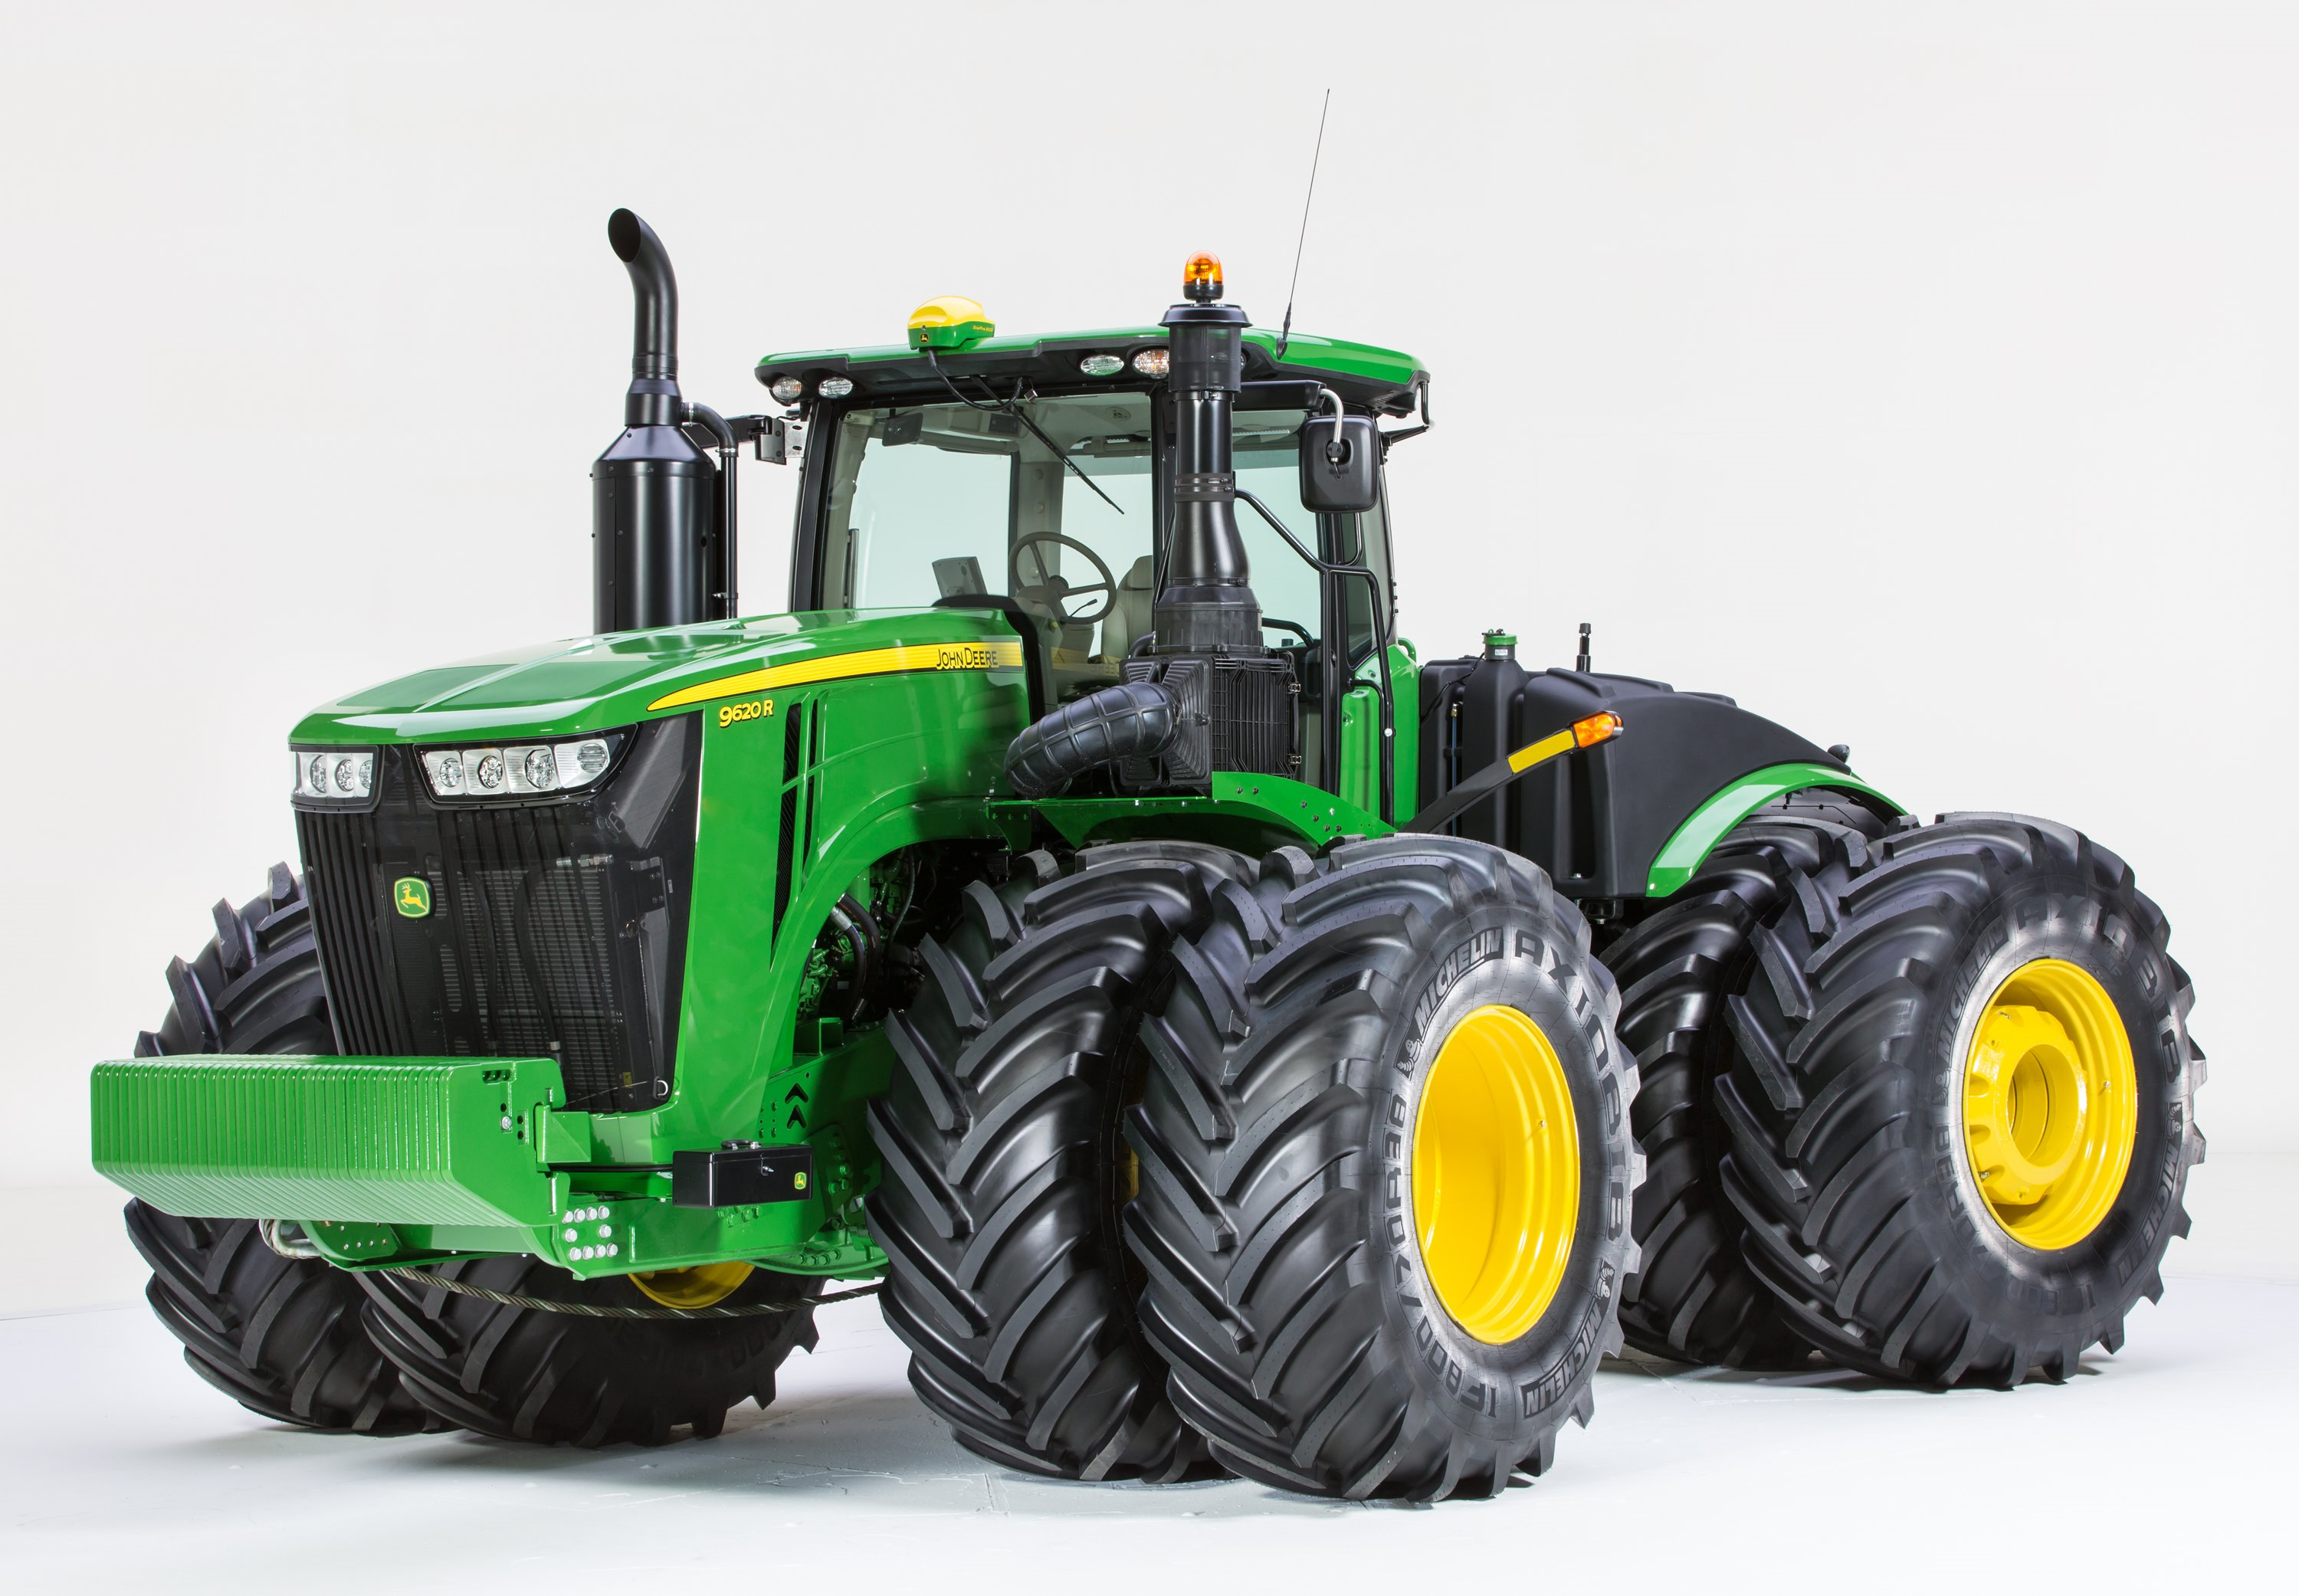 ... the front view of a John Deere 9620R tractor with composite fuel tank